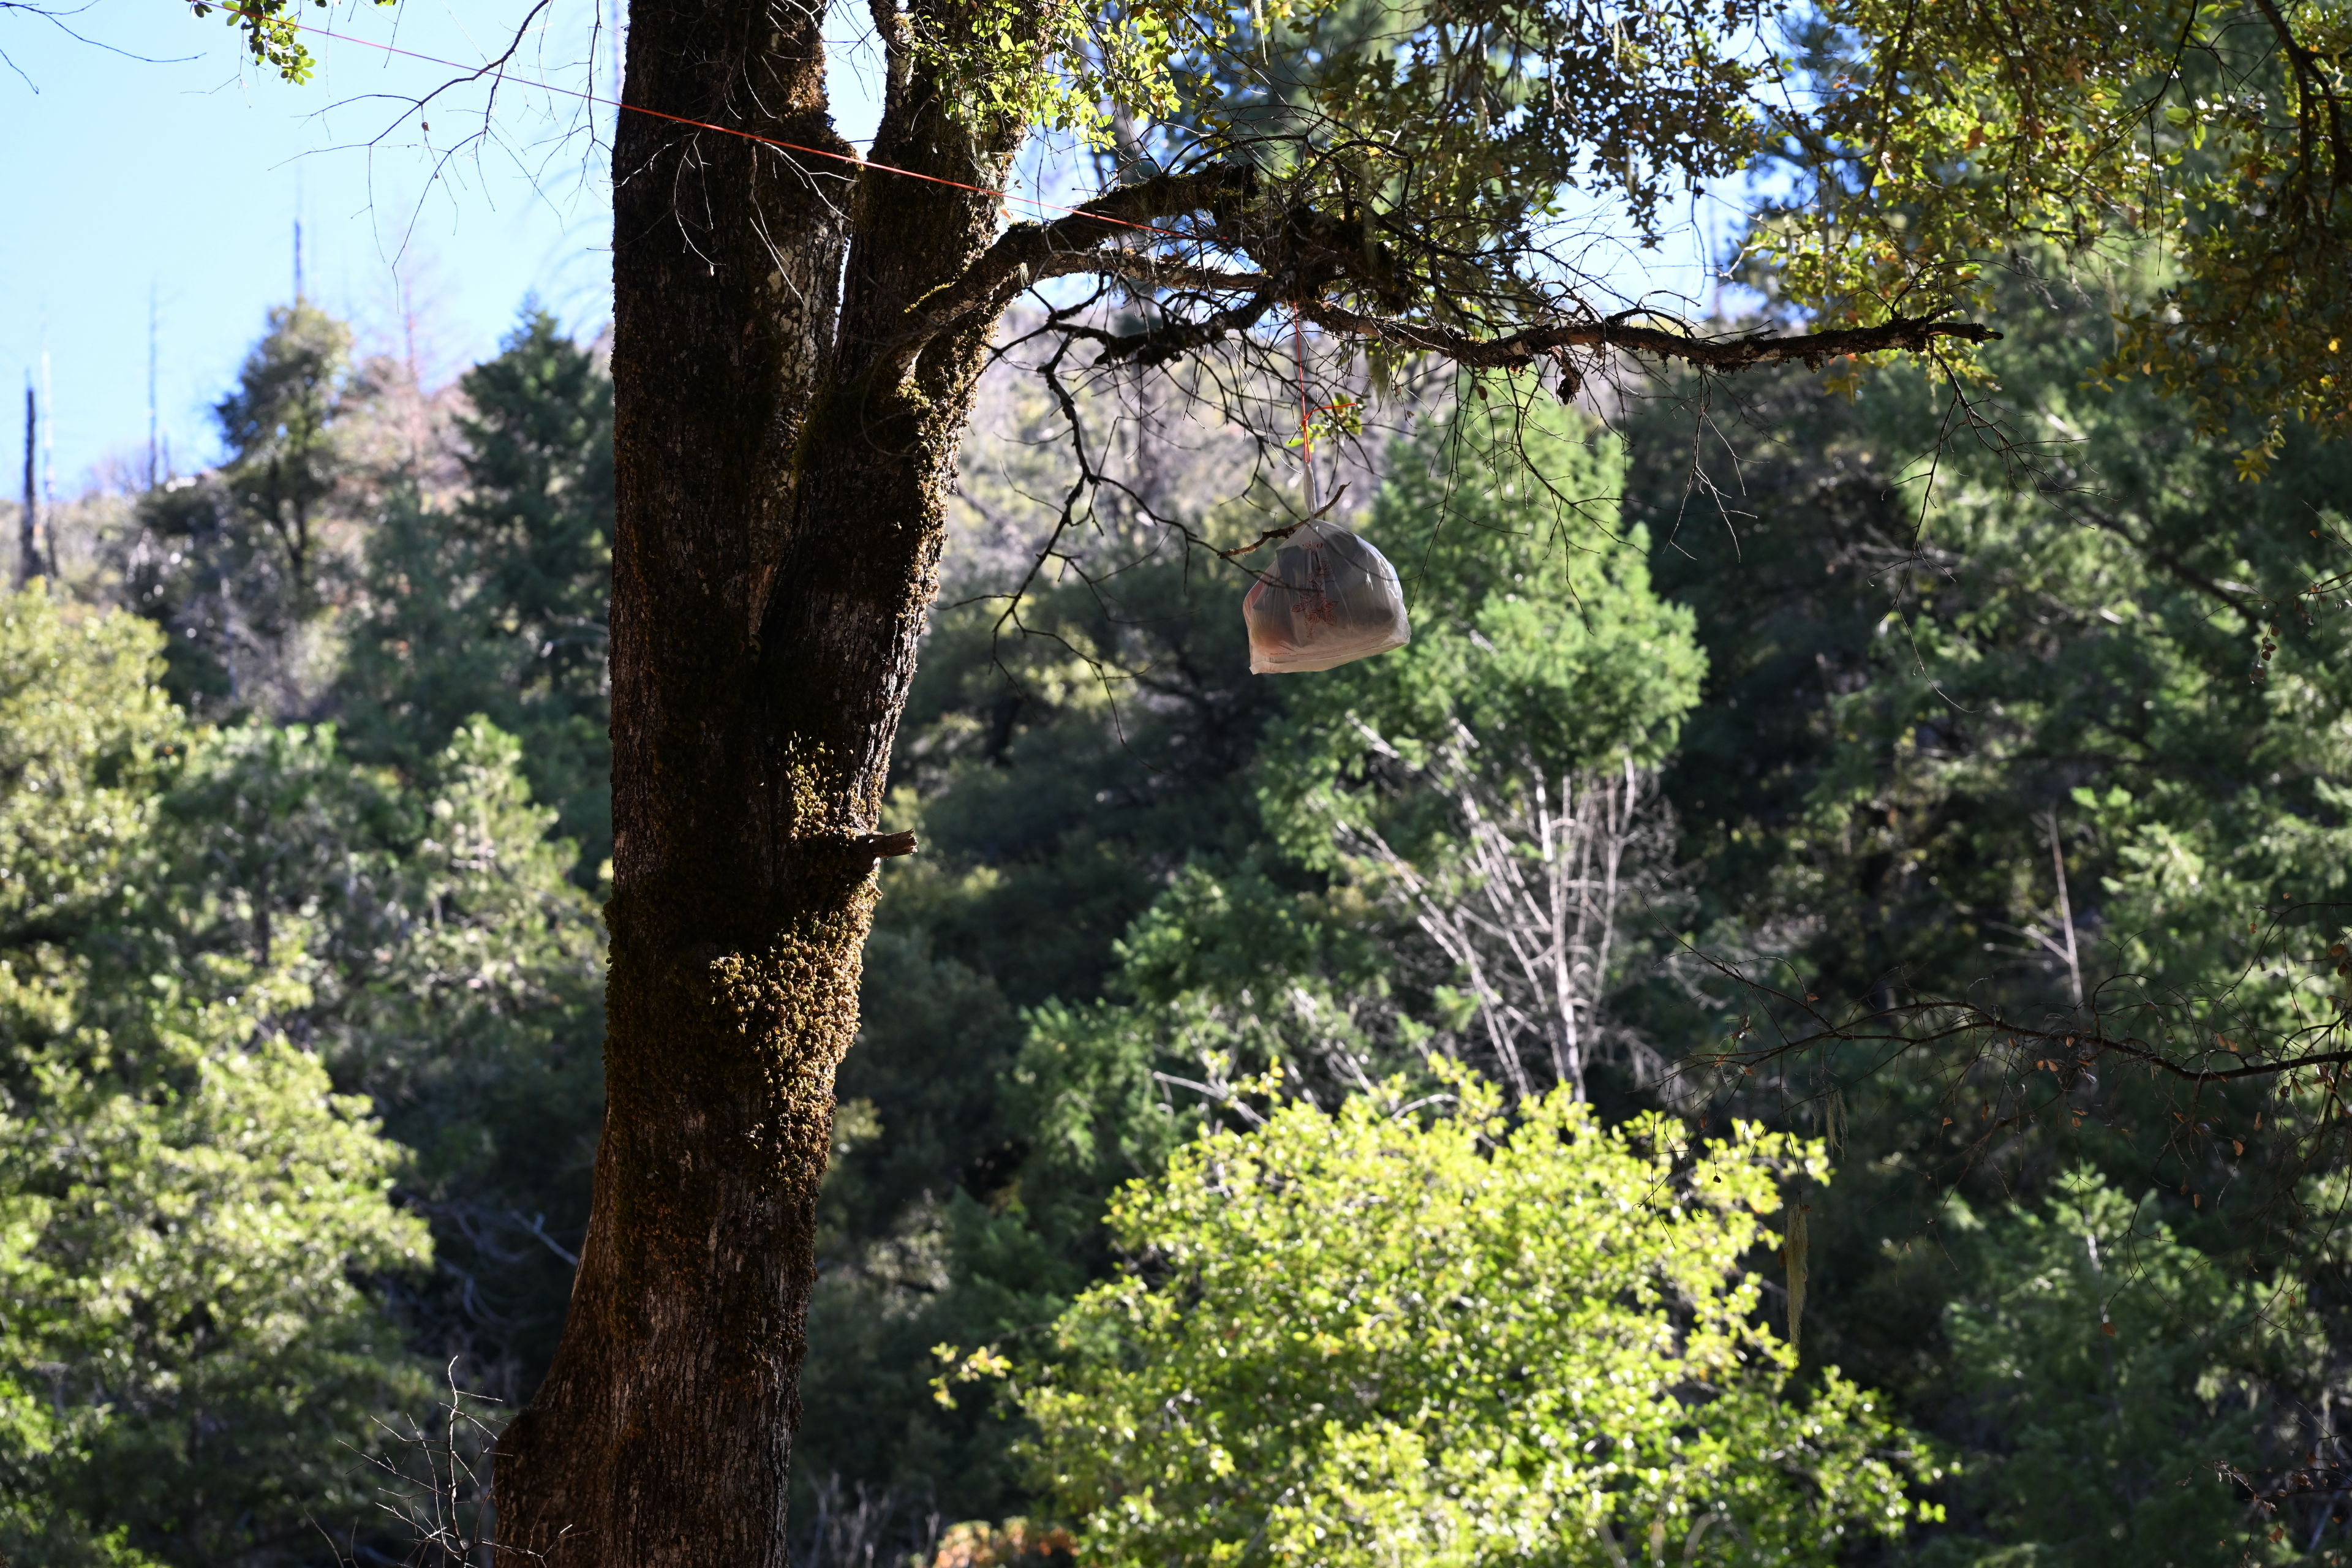 I put what little potentially smelly food we had in a plastic bag and suspended it from a tree about 100 feet from our campsite. It wasn't as bear proof as I'd like, but I figured it would be good enough, and it turned out fine.